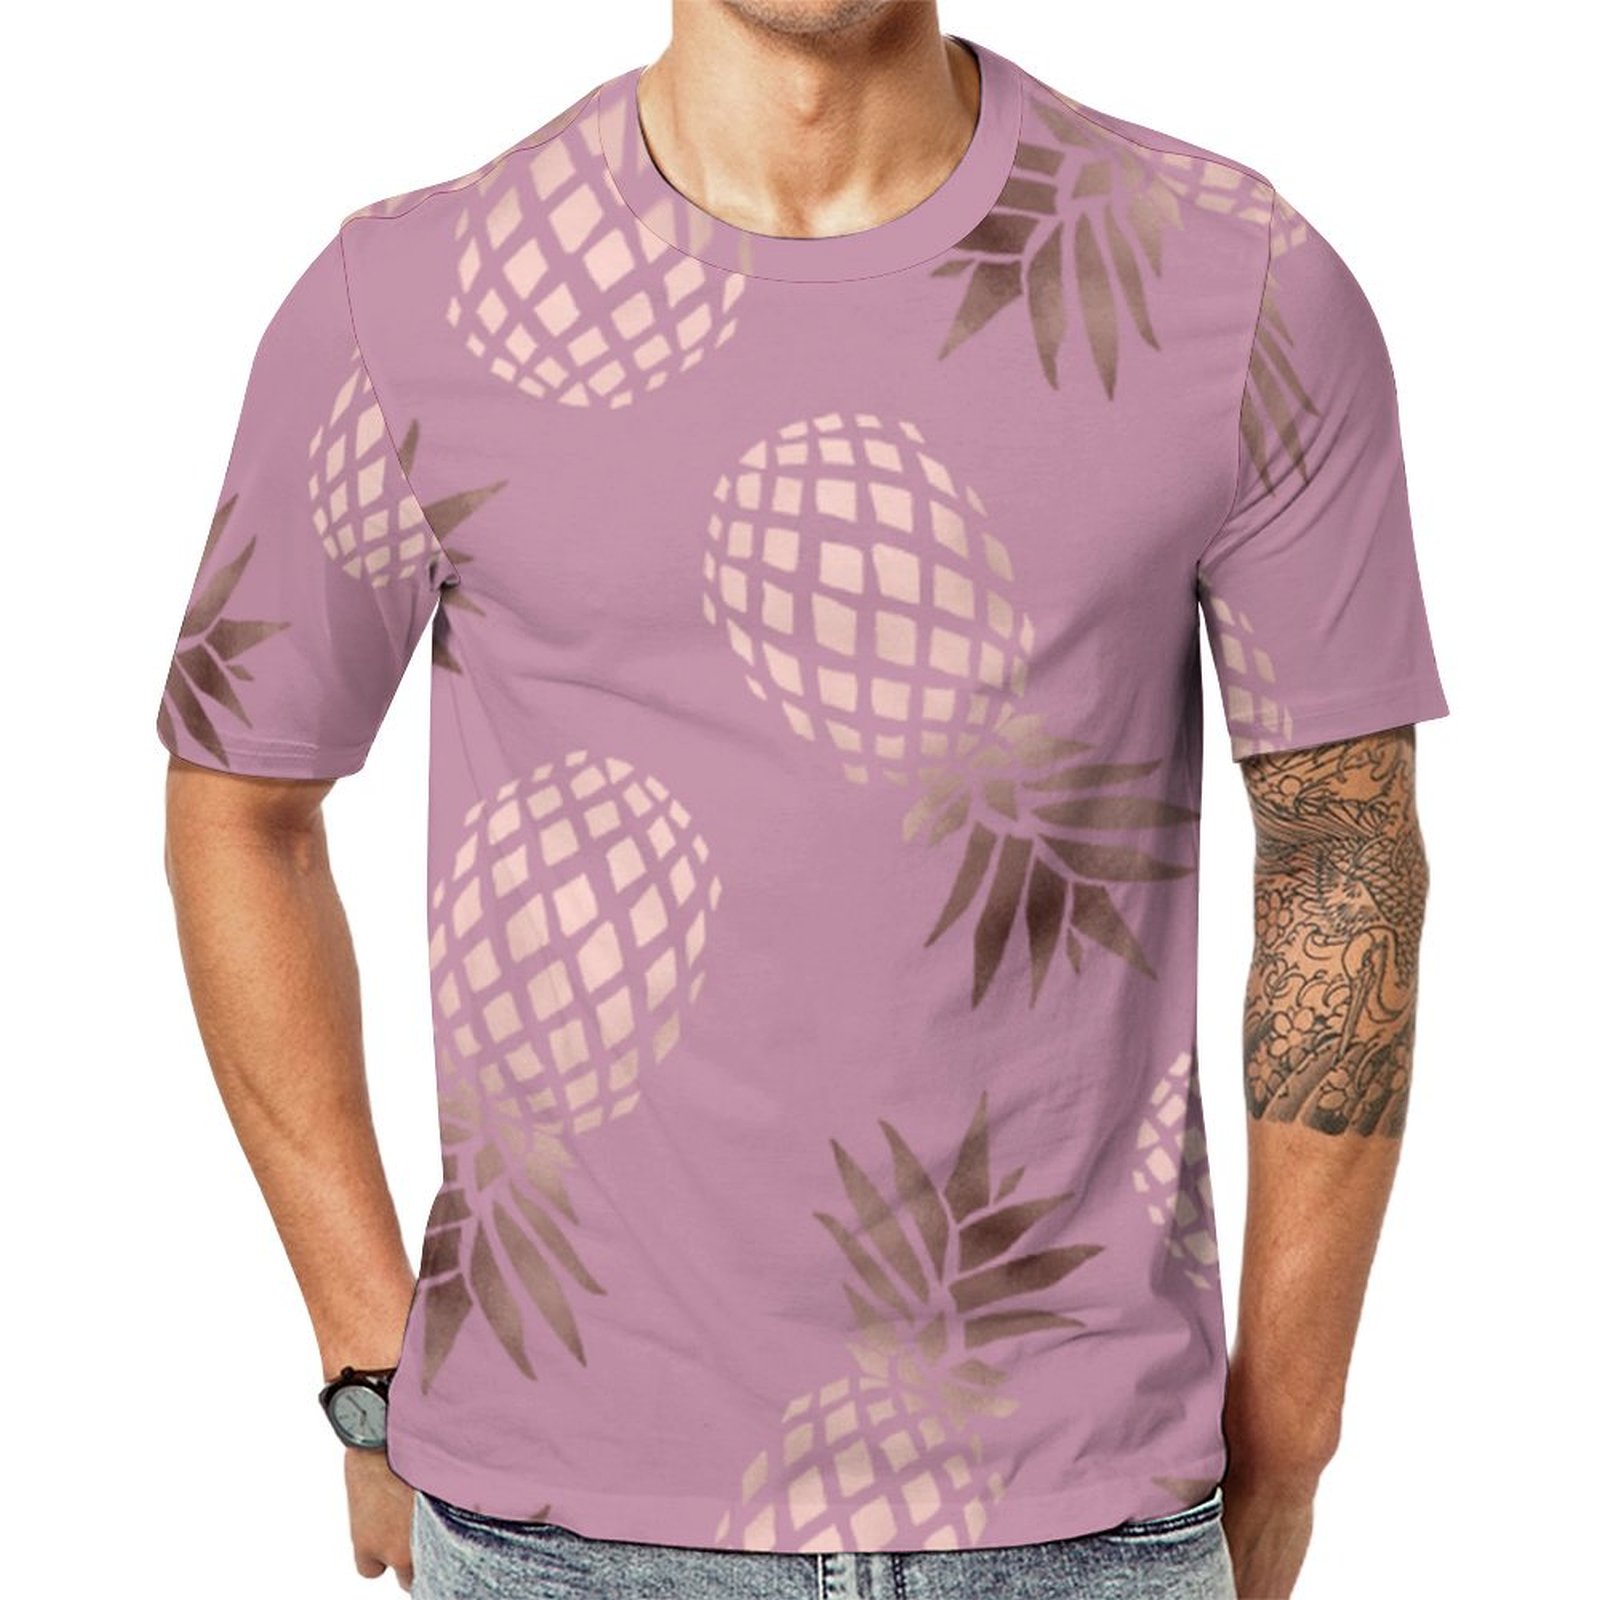 Elegant And Cute Rose Gold Pineapple Short Sleeve Print Unisex Tshirt Summer Casual Tees for Men and Women Coolcoshirts